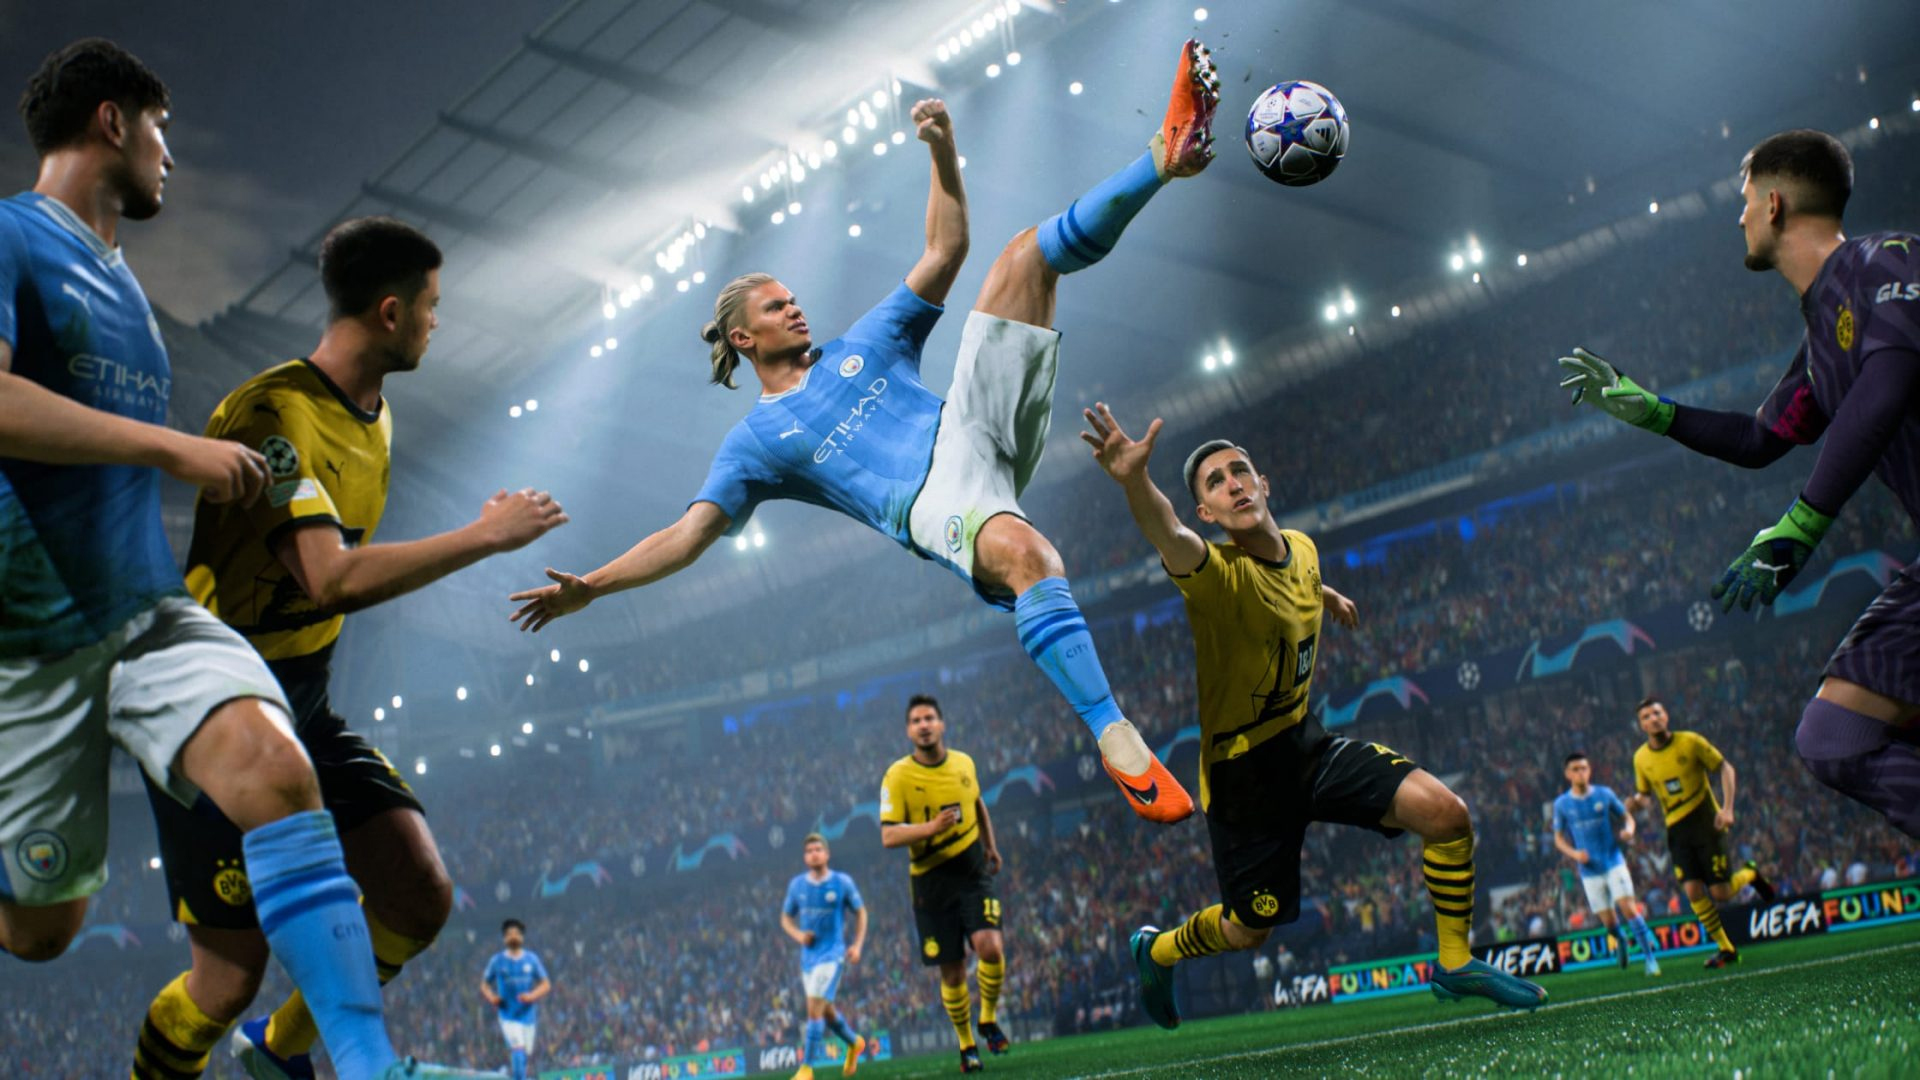 Play FIFA 23 for free on Steam until December 19 (updated)